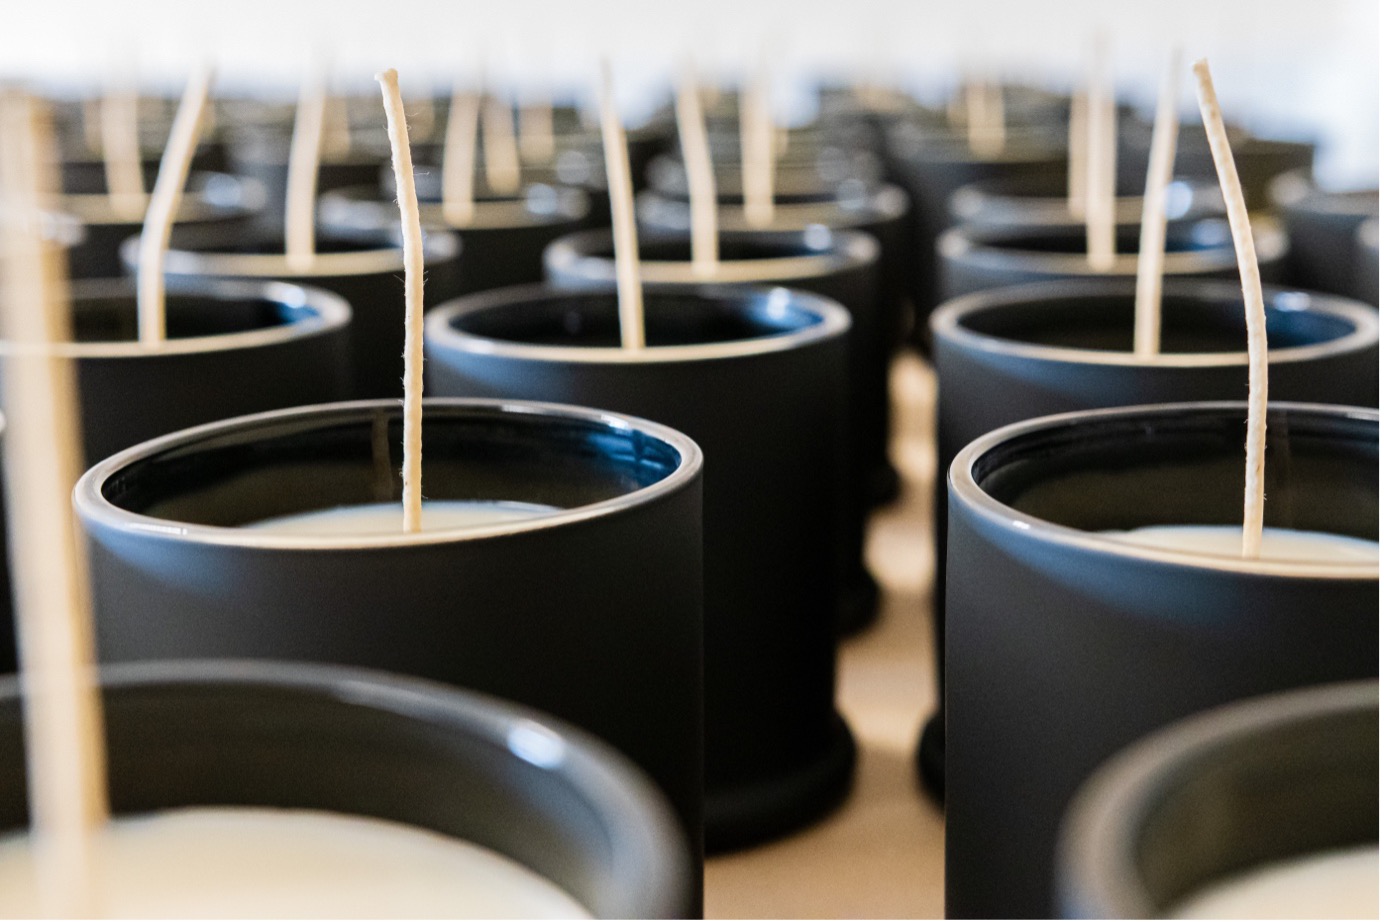 Candles lined up ready to have their wicks trimmed to size.